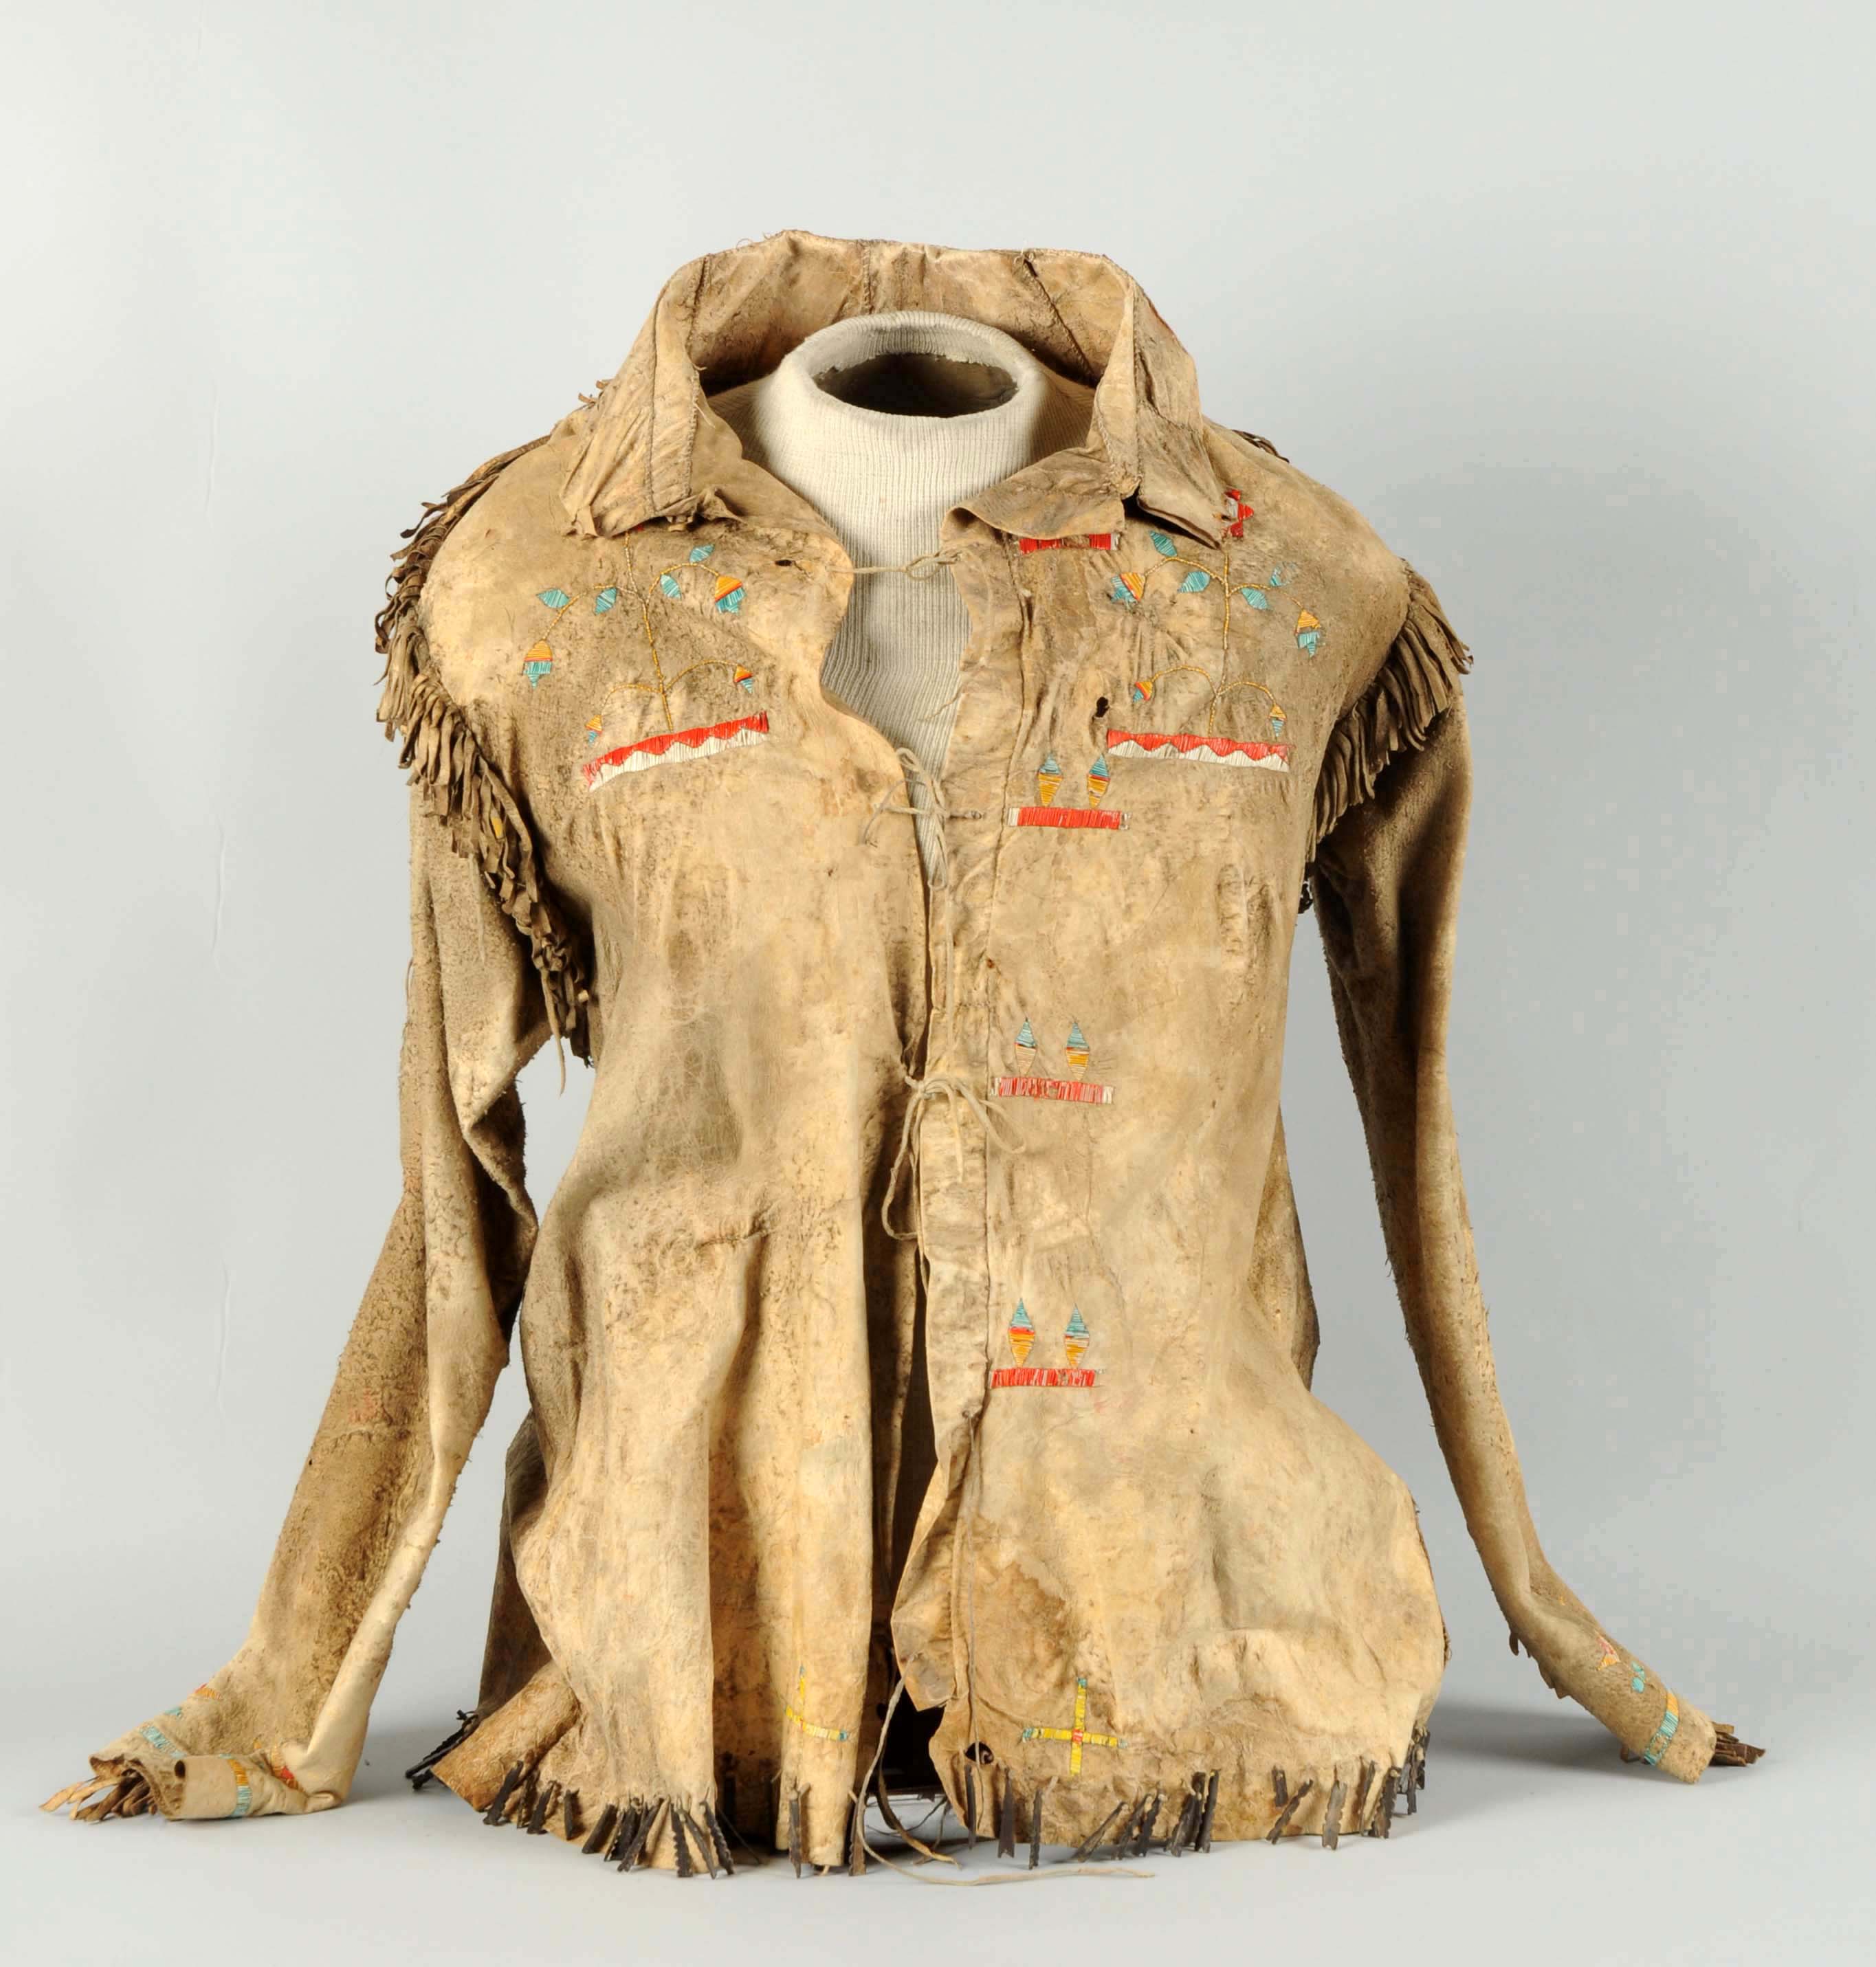 Santee Sioux Scout Shirt, Estimated at $10,000-15,000.